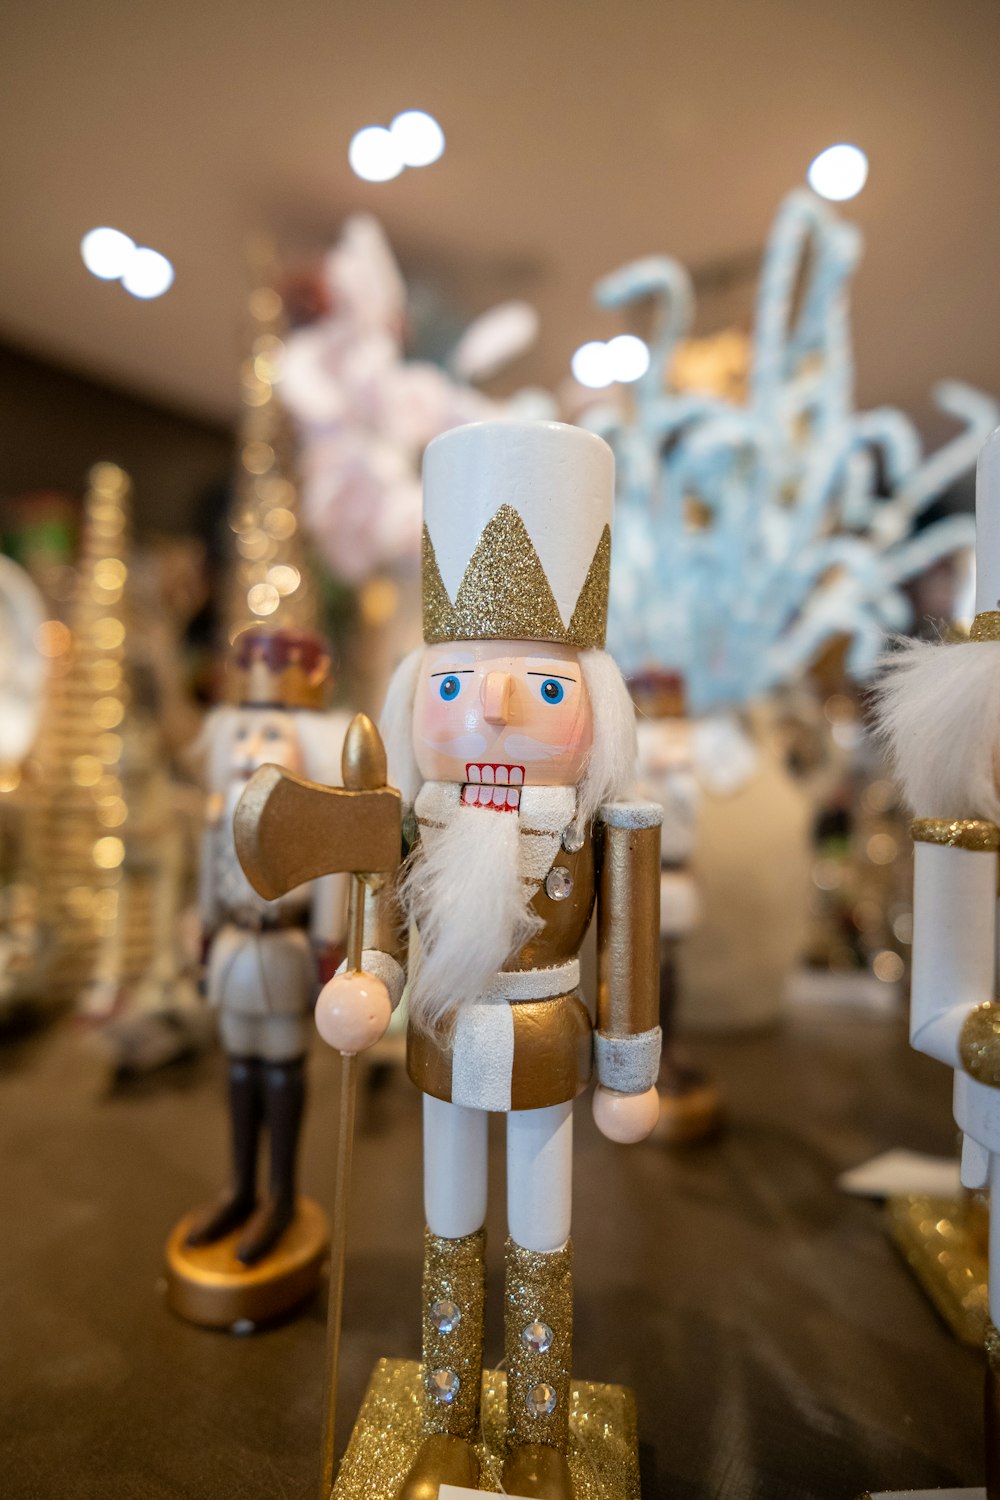 a nutcracker figurine is standing in front of other nutcracker